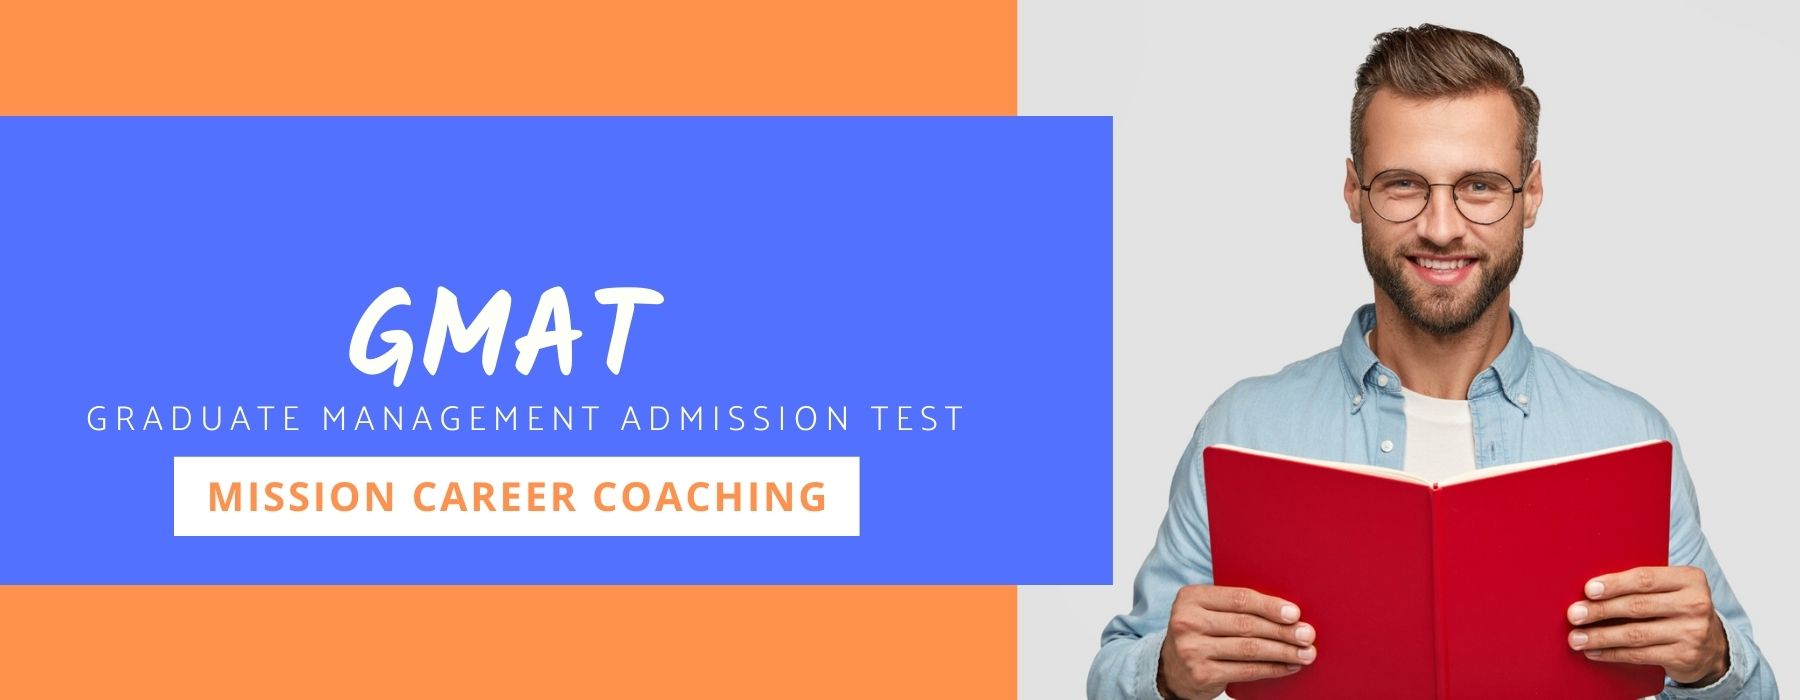 GMAT (Graduate Management Admission Test) with Mission Career coaching